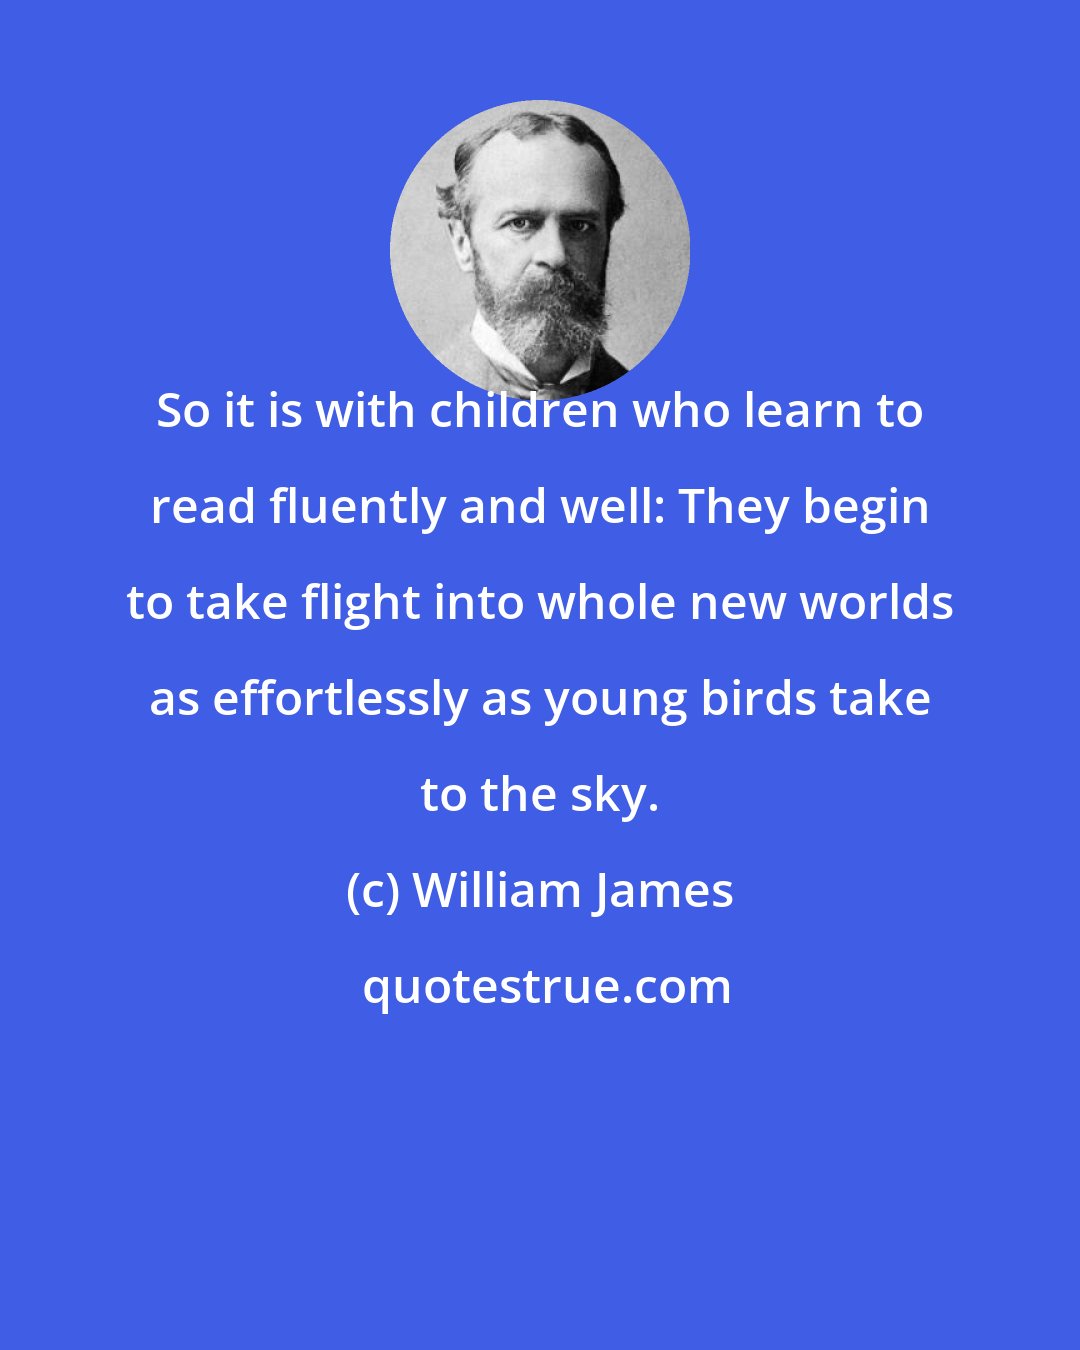 William James: So it is with children who learn to read fluently and well: They begin to take flight into whole new worlds as effortlessly as young birds take to the sky.